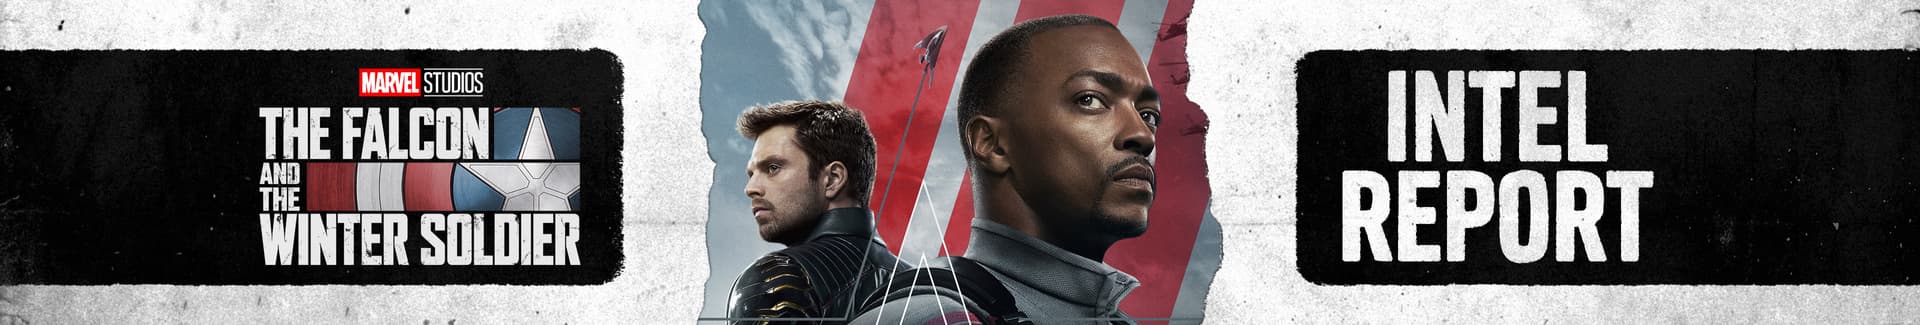 Falcon and Winter Soldier Episode 3 Intel Report